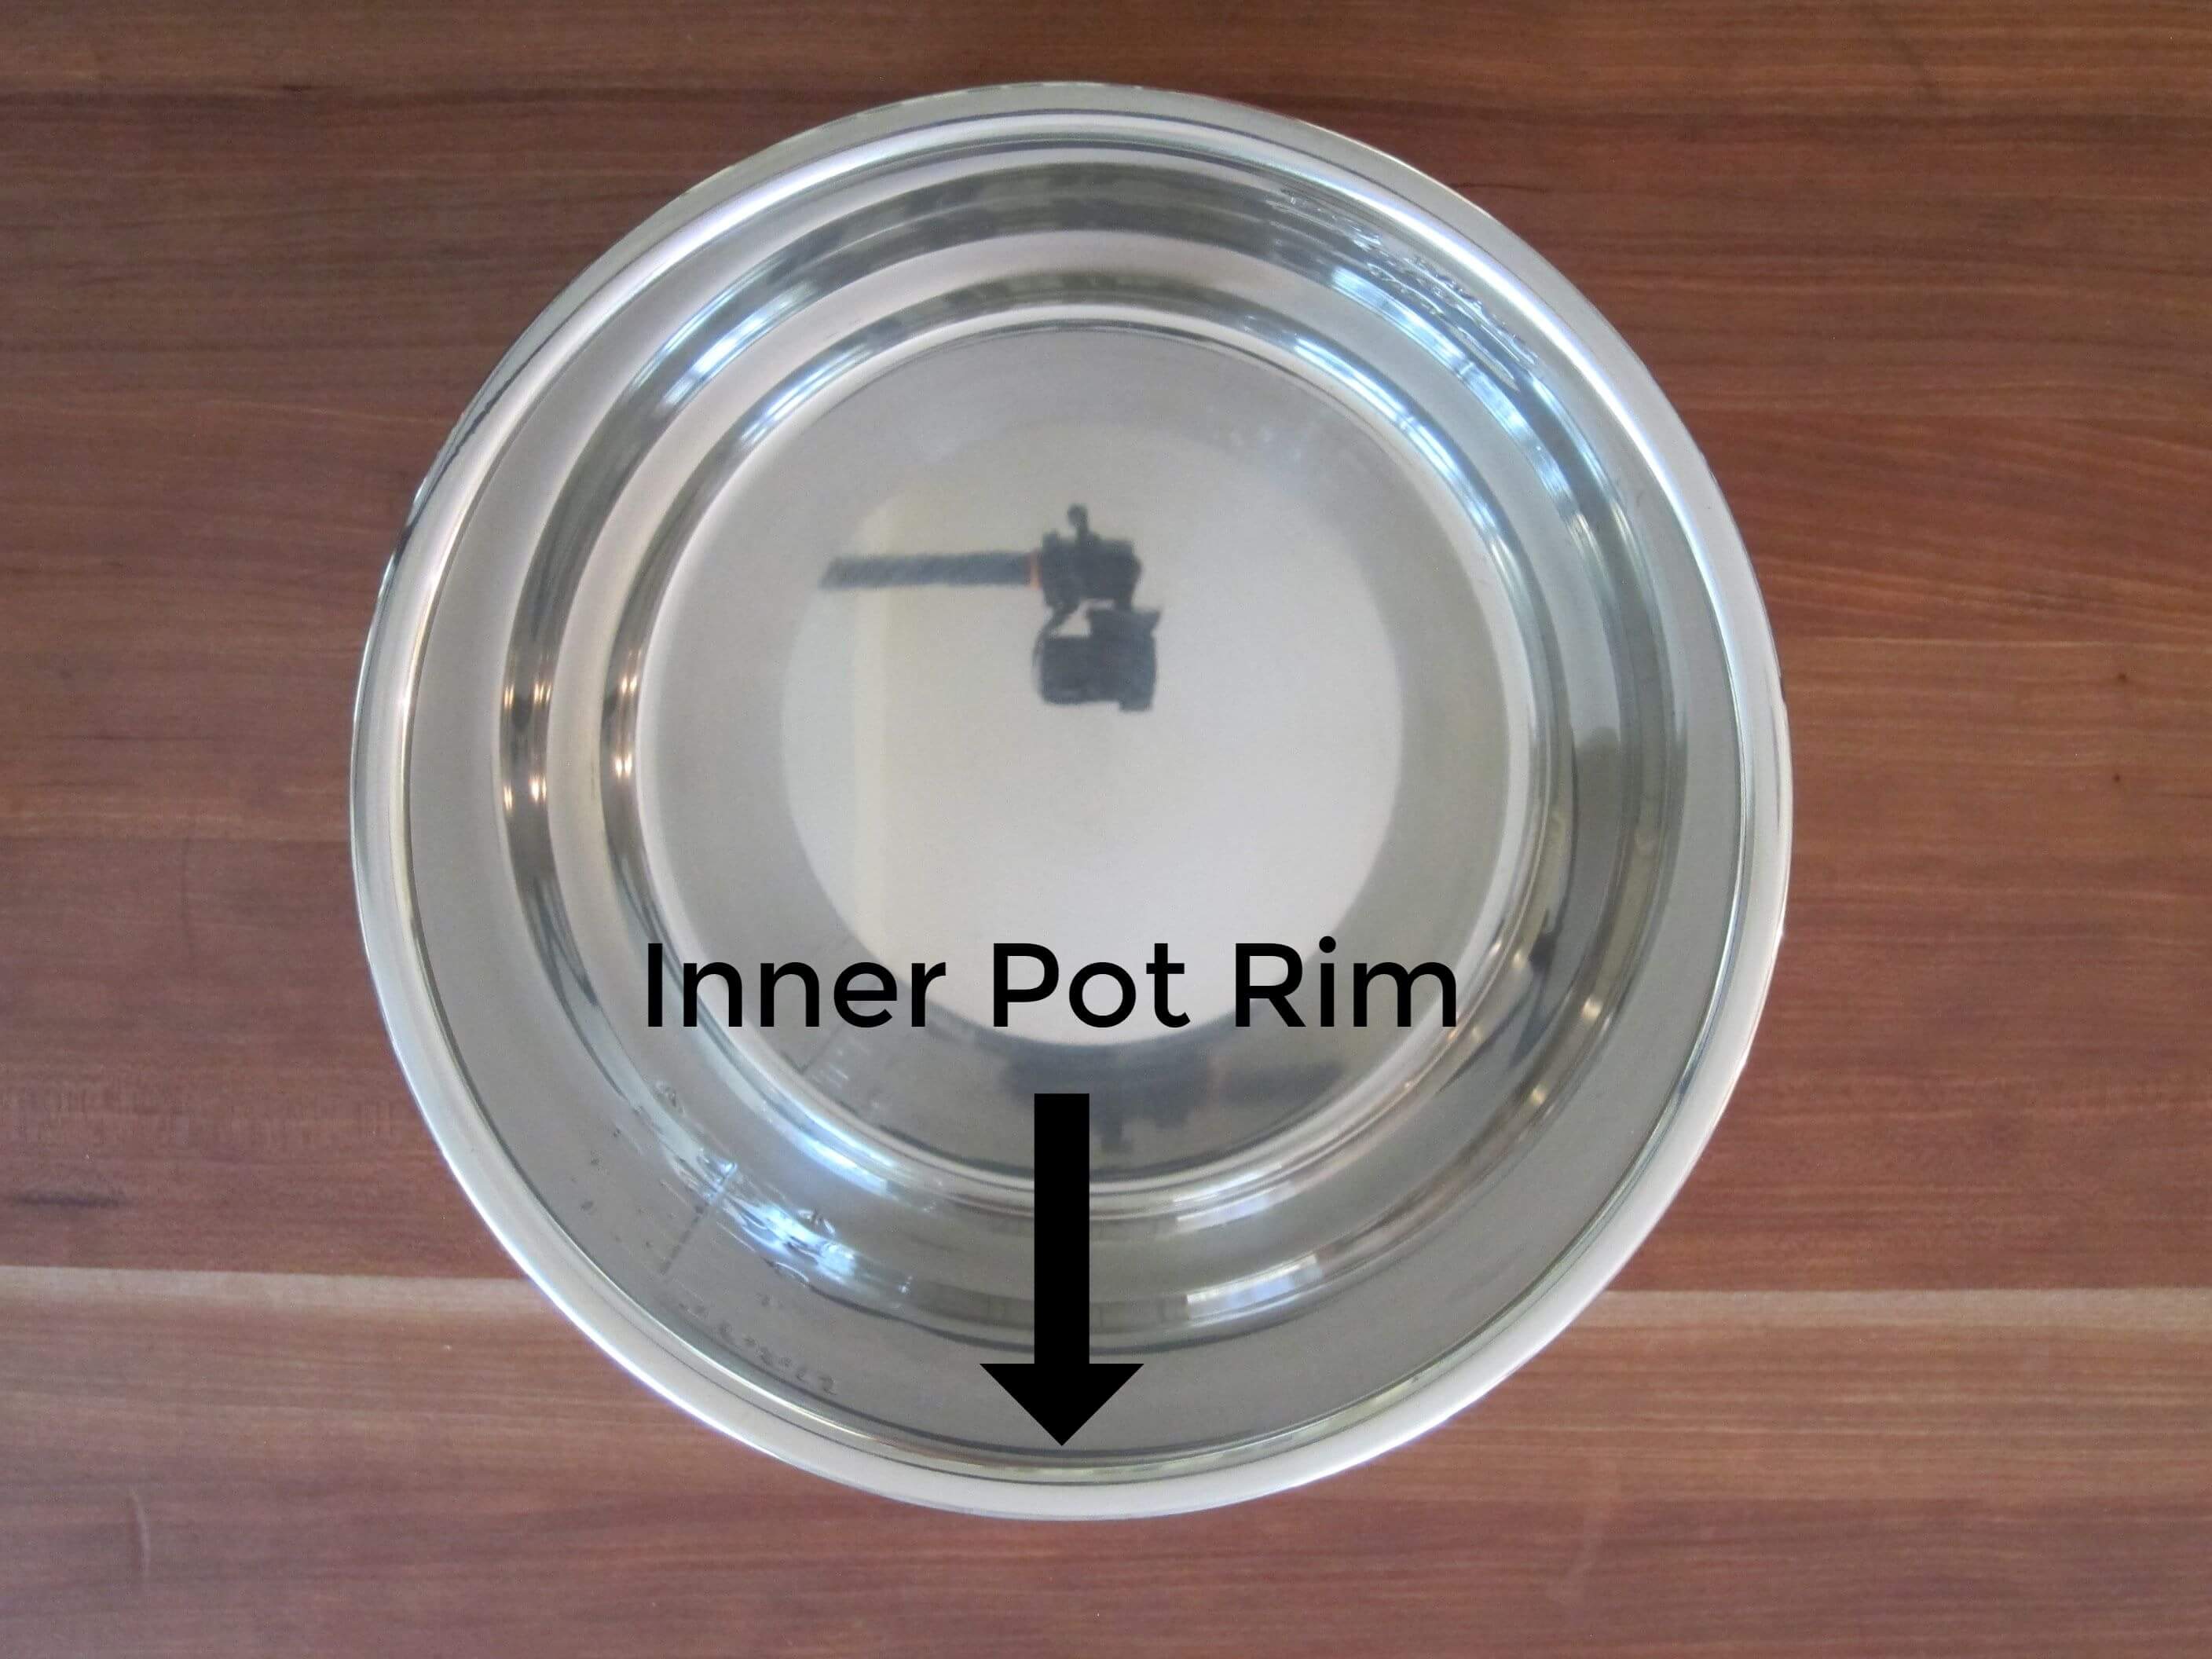 Instant Pot Inner Pot with arrow pointing to the rim